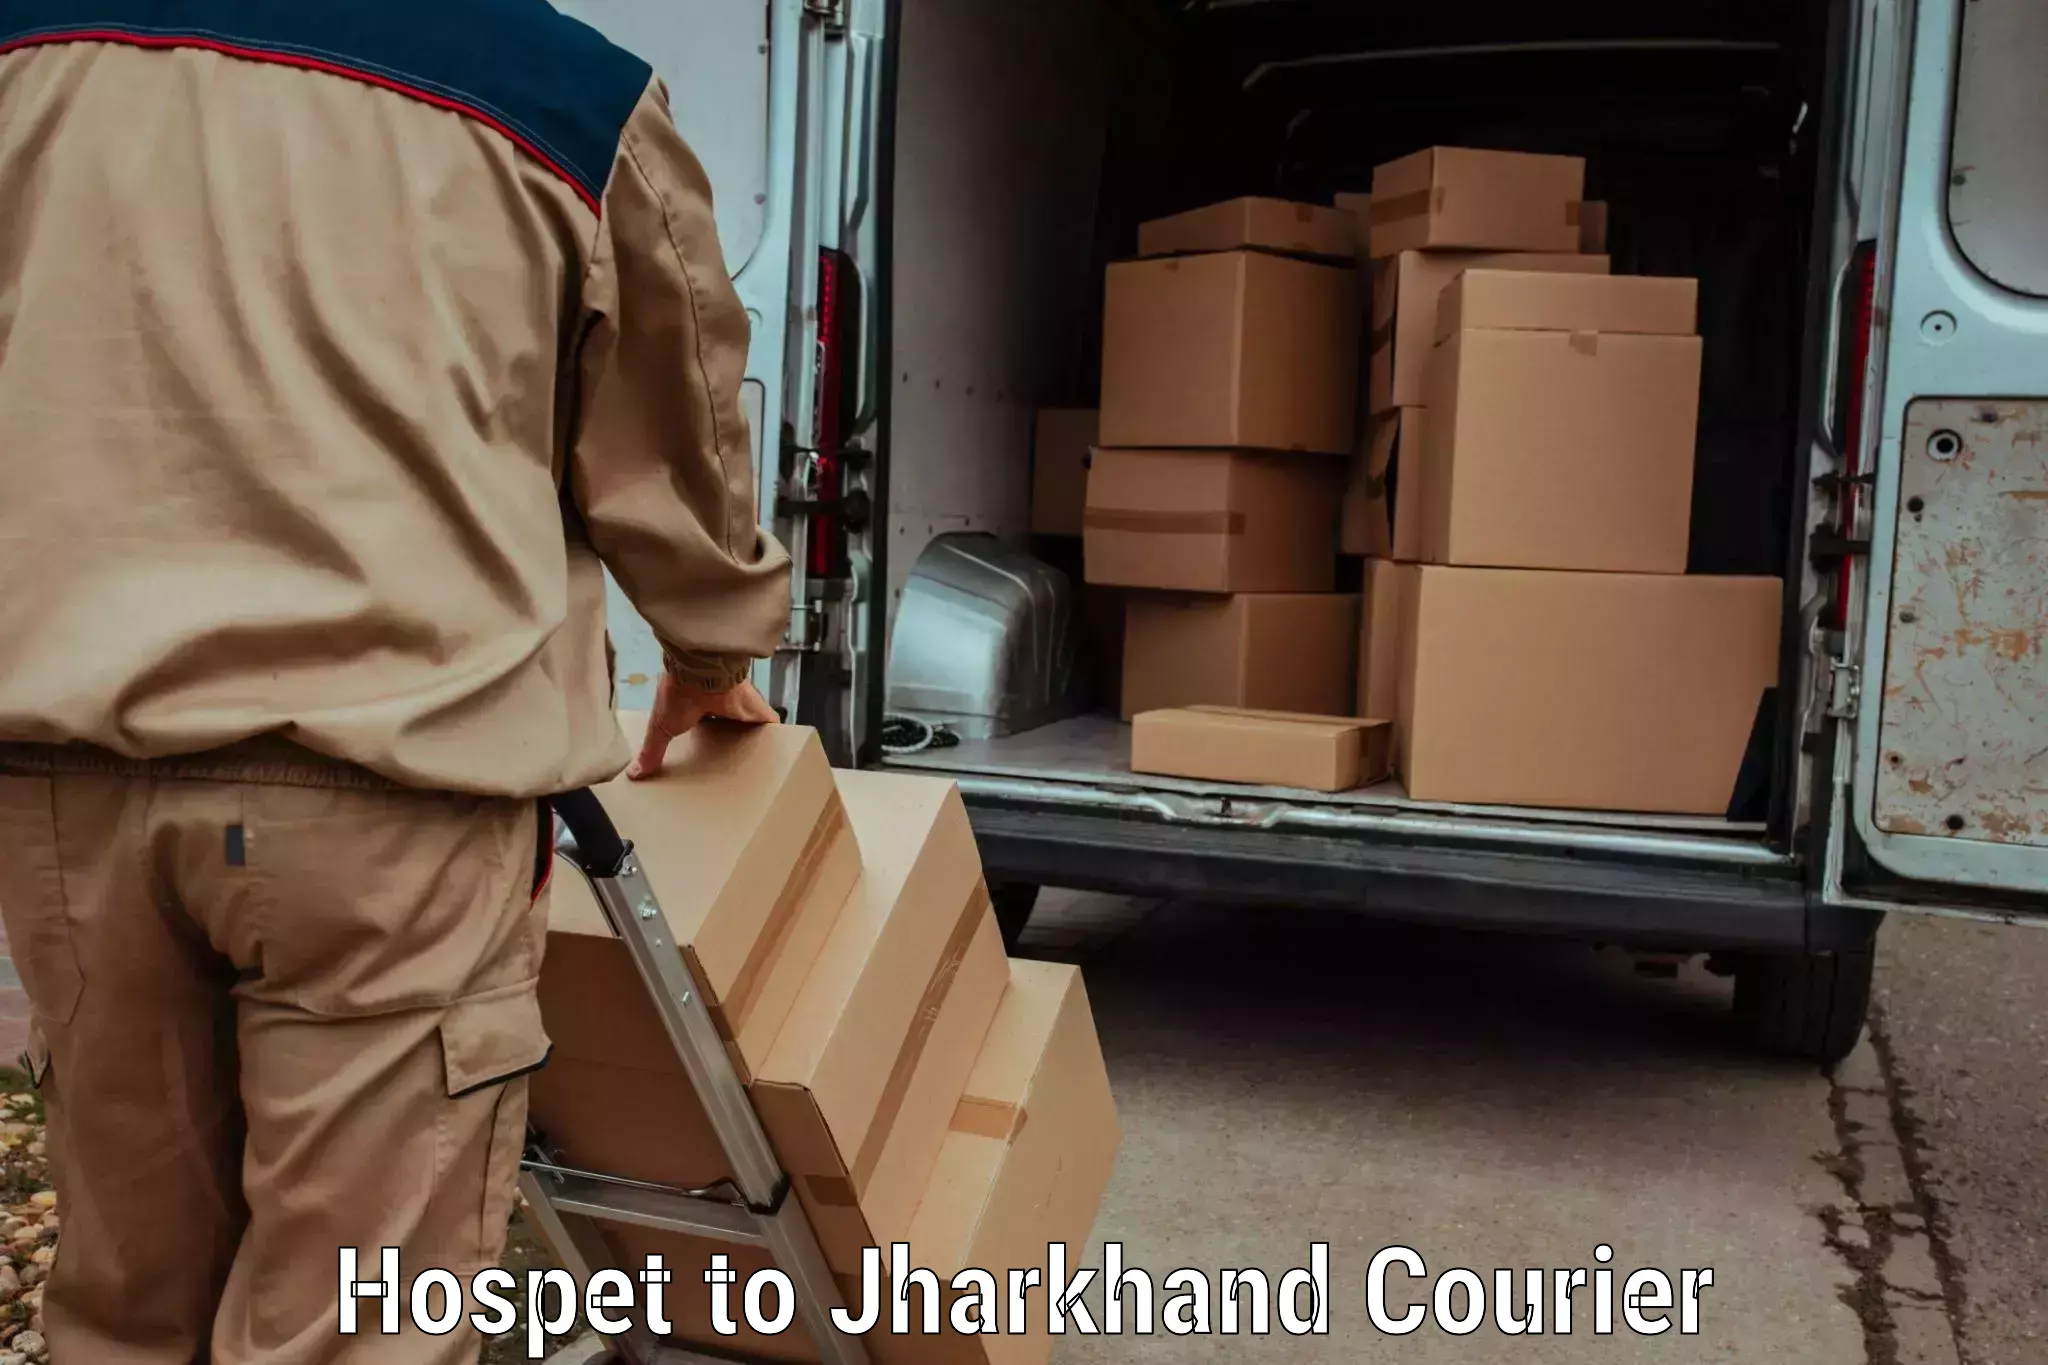 Overnight delivery services Hospet to Godabar Chatra